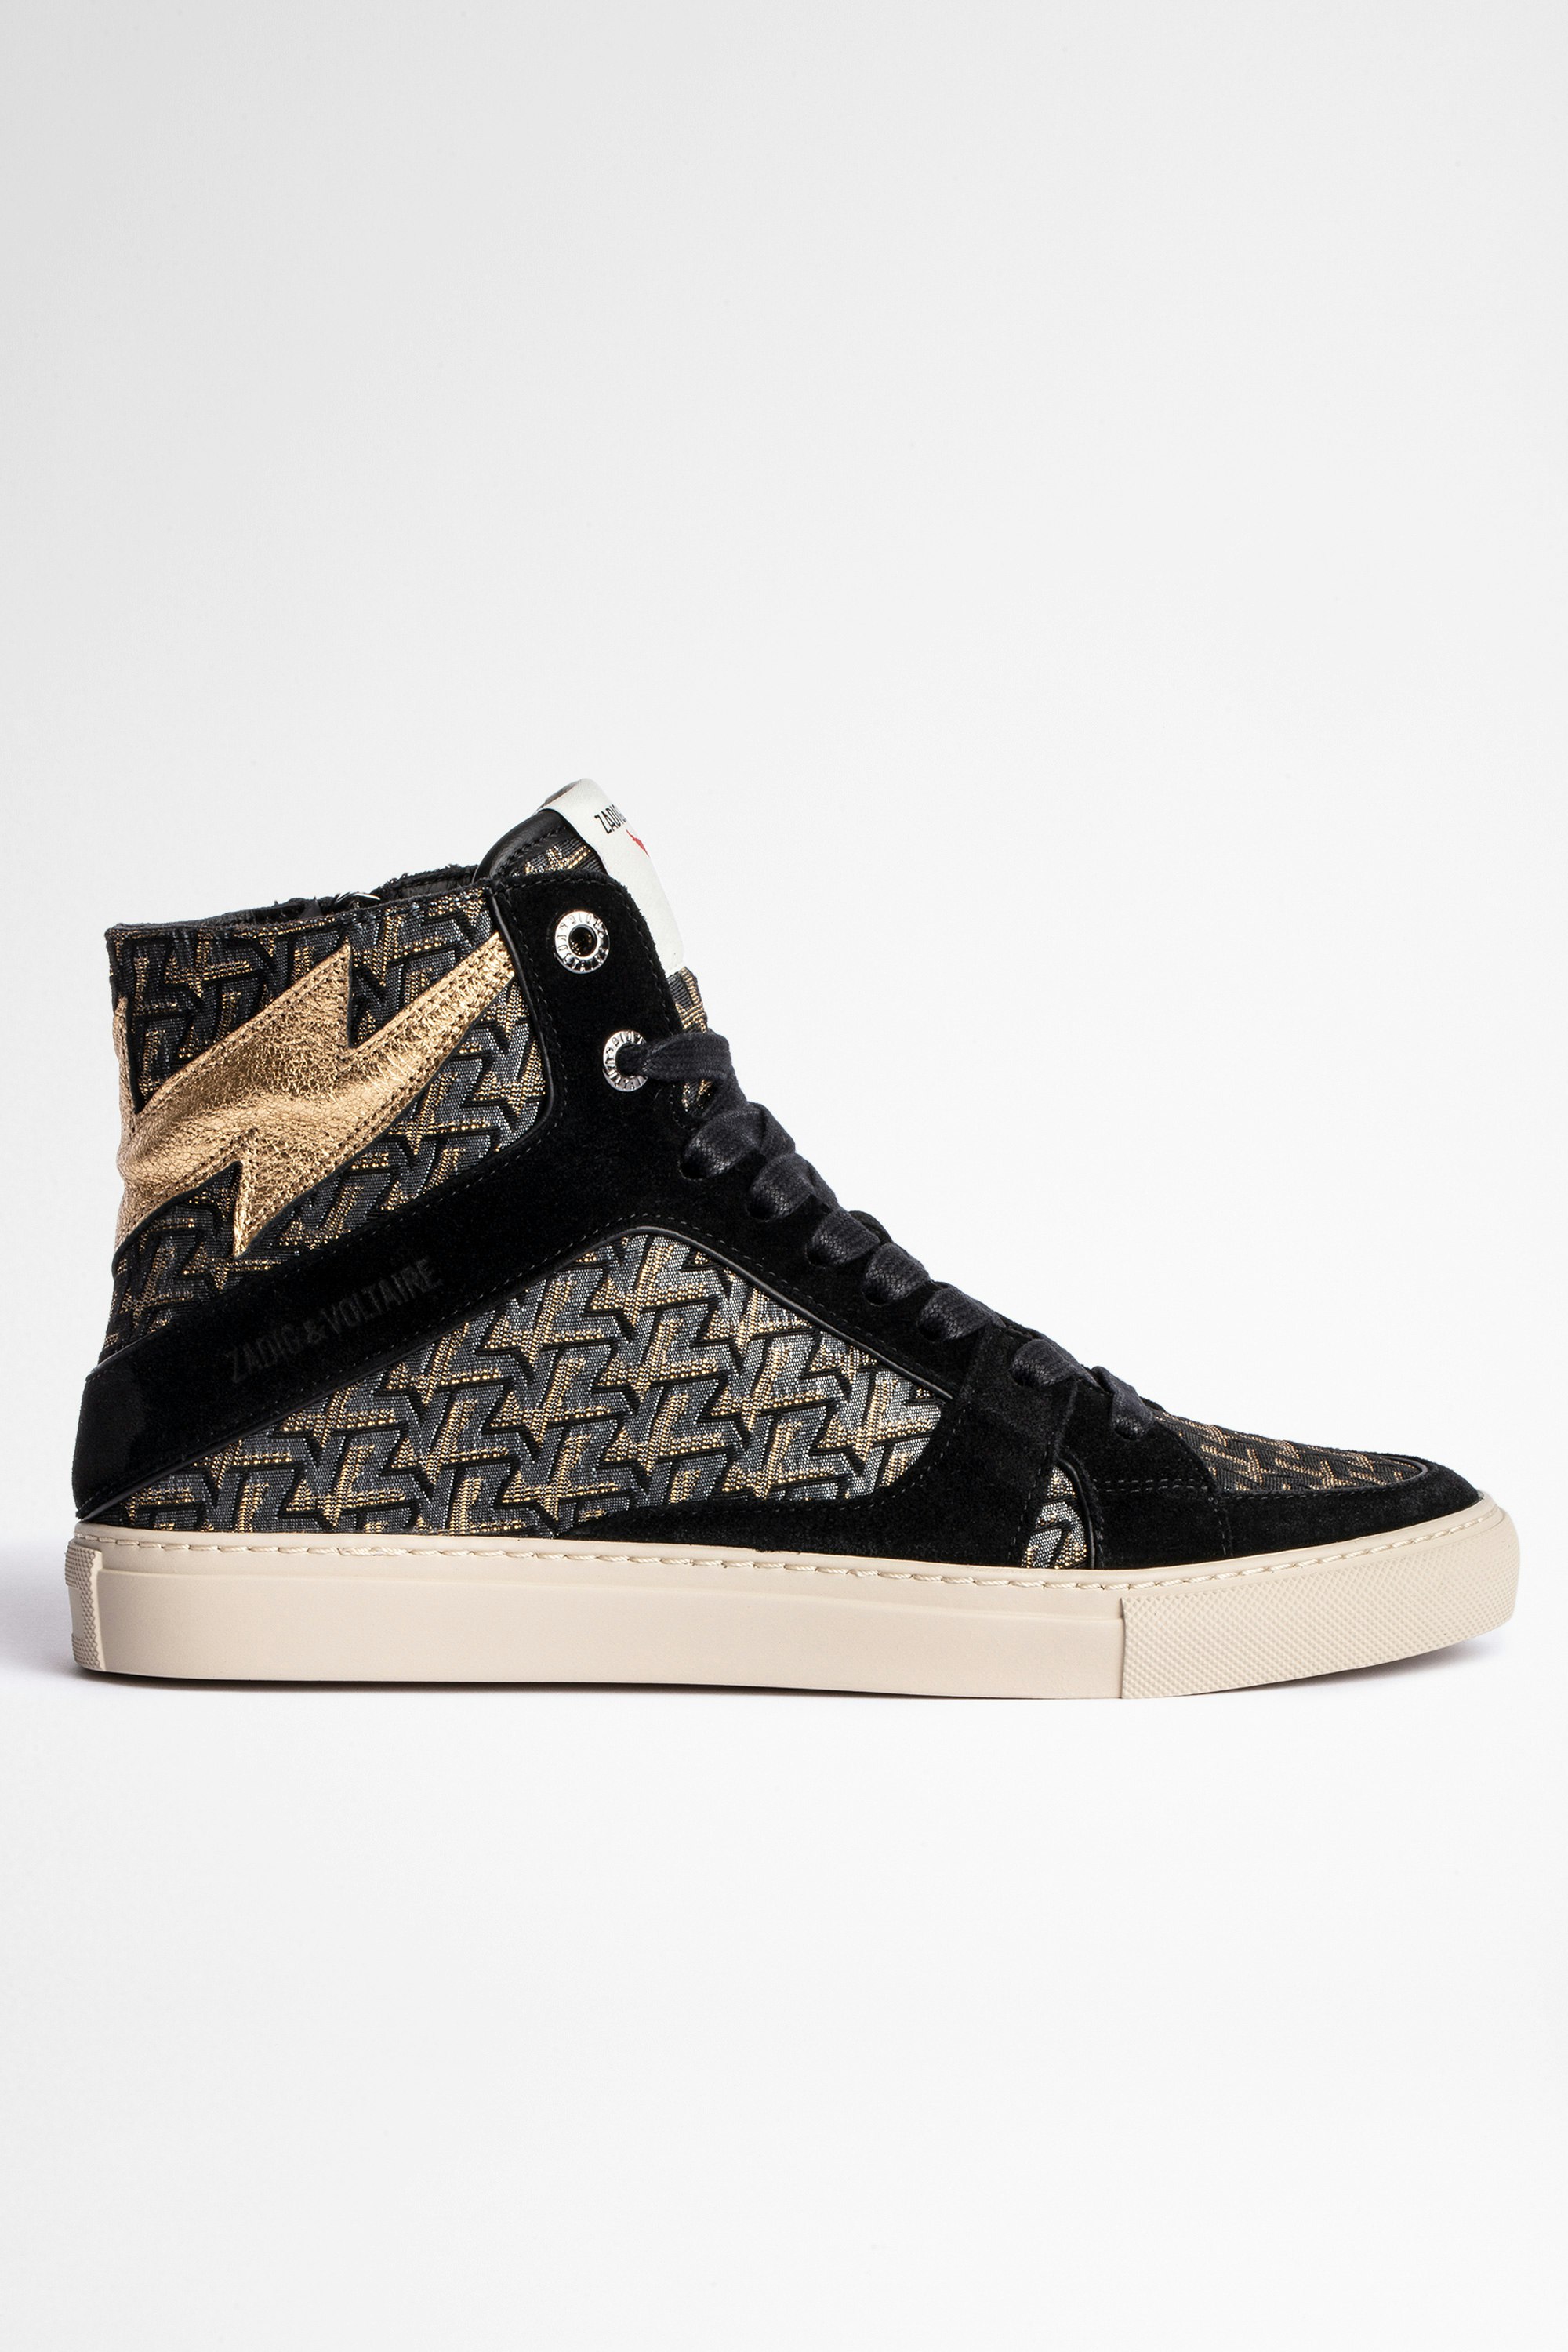 ZV1747 High Flash Metal スニーカー Women's high-top sneakers in leather and ZV street jacquard